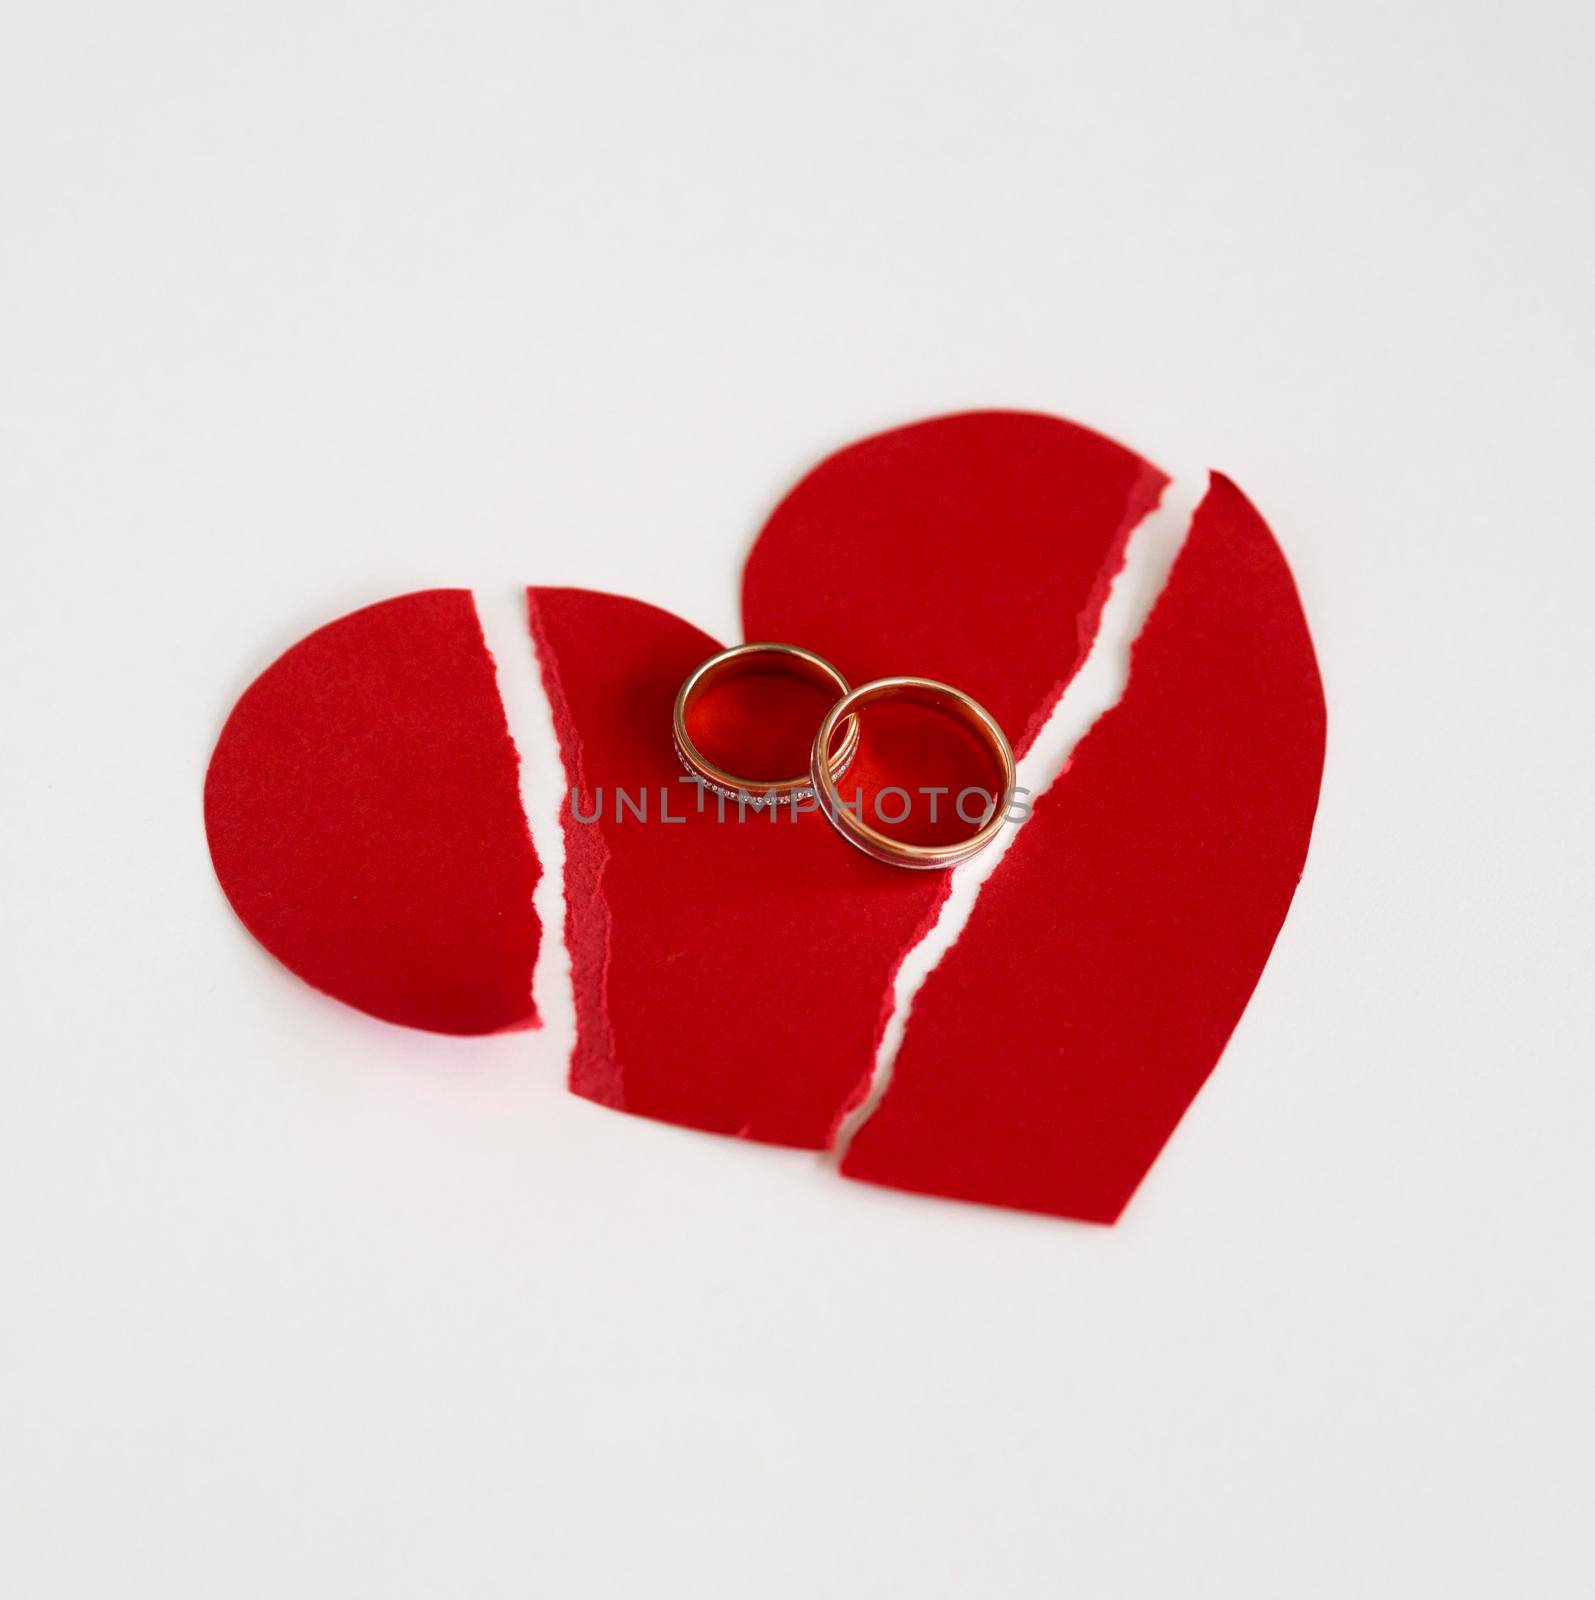 marriage rings paper heart broken. High resolution photo